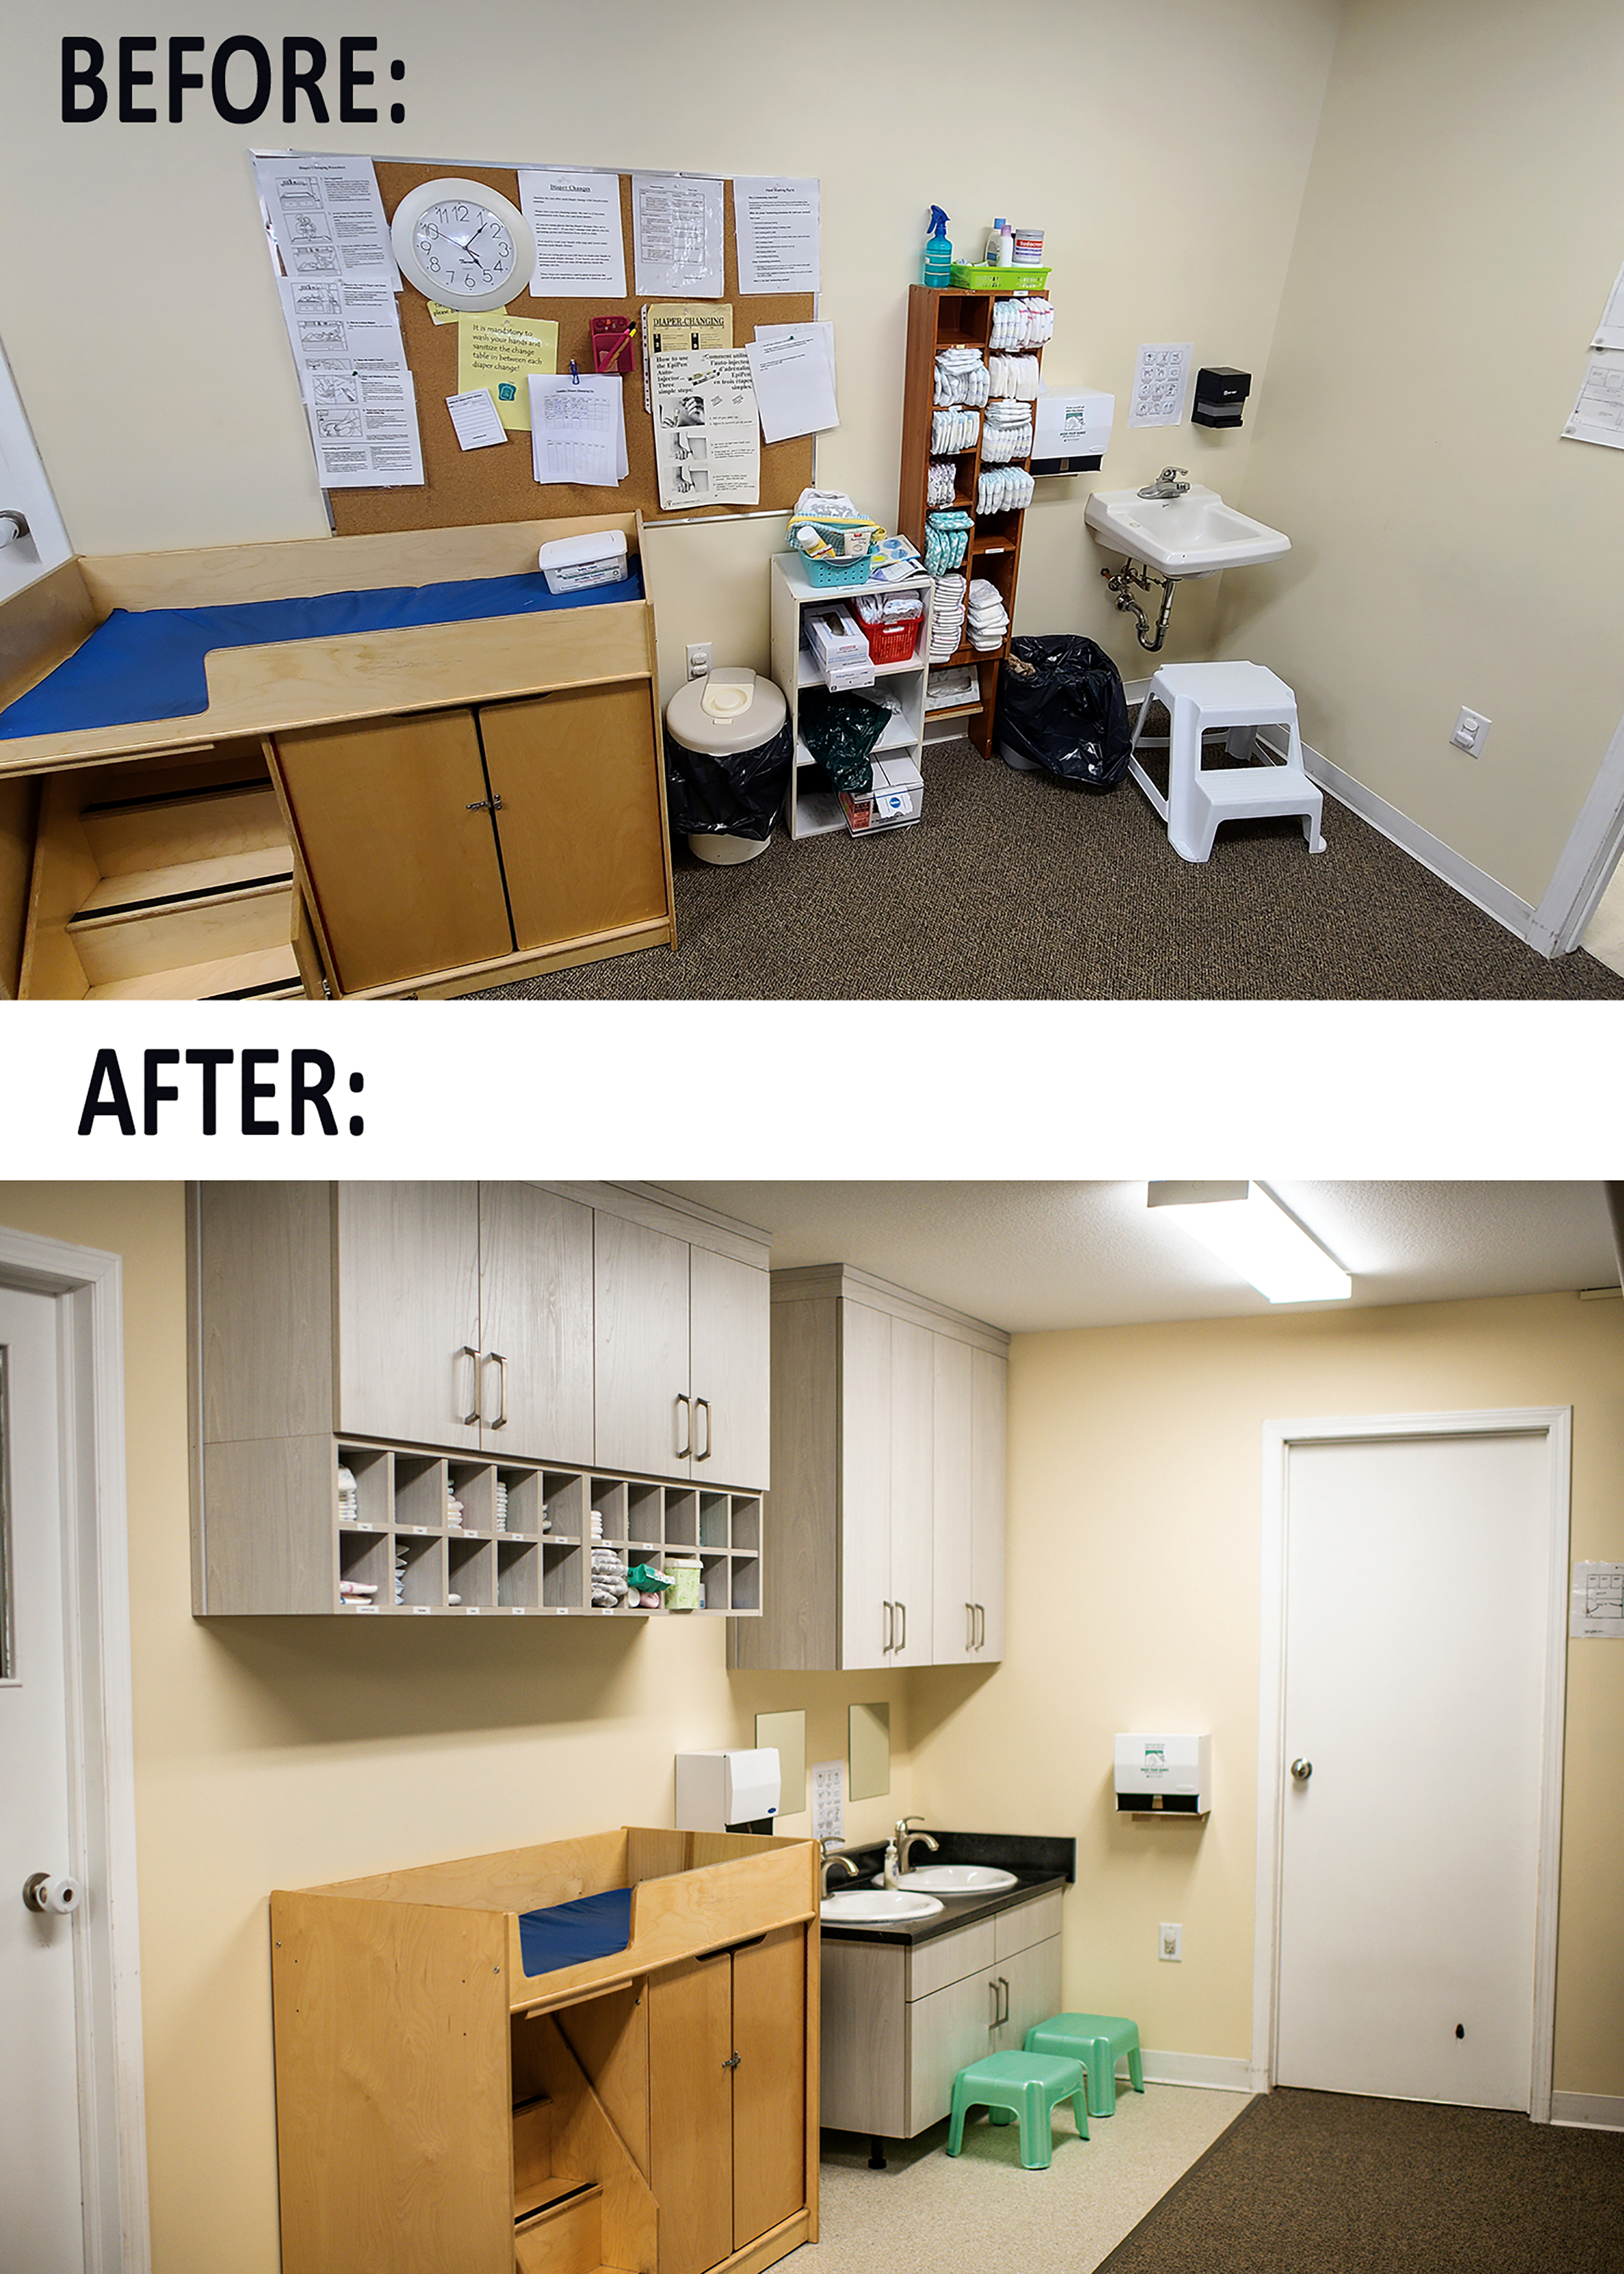 Renovations at Play Fair Daycare have been completed. The renovations include a new changing station, handwashing station, kitchen, and additional storage space.